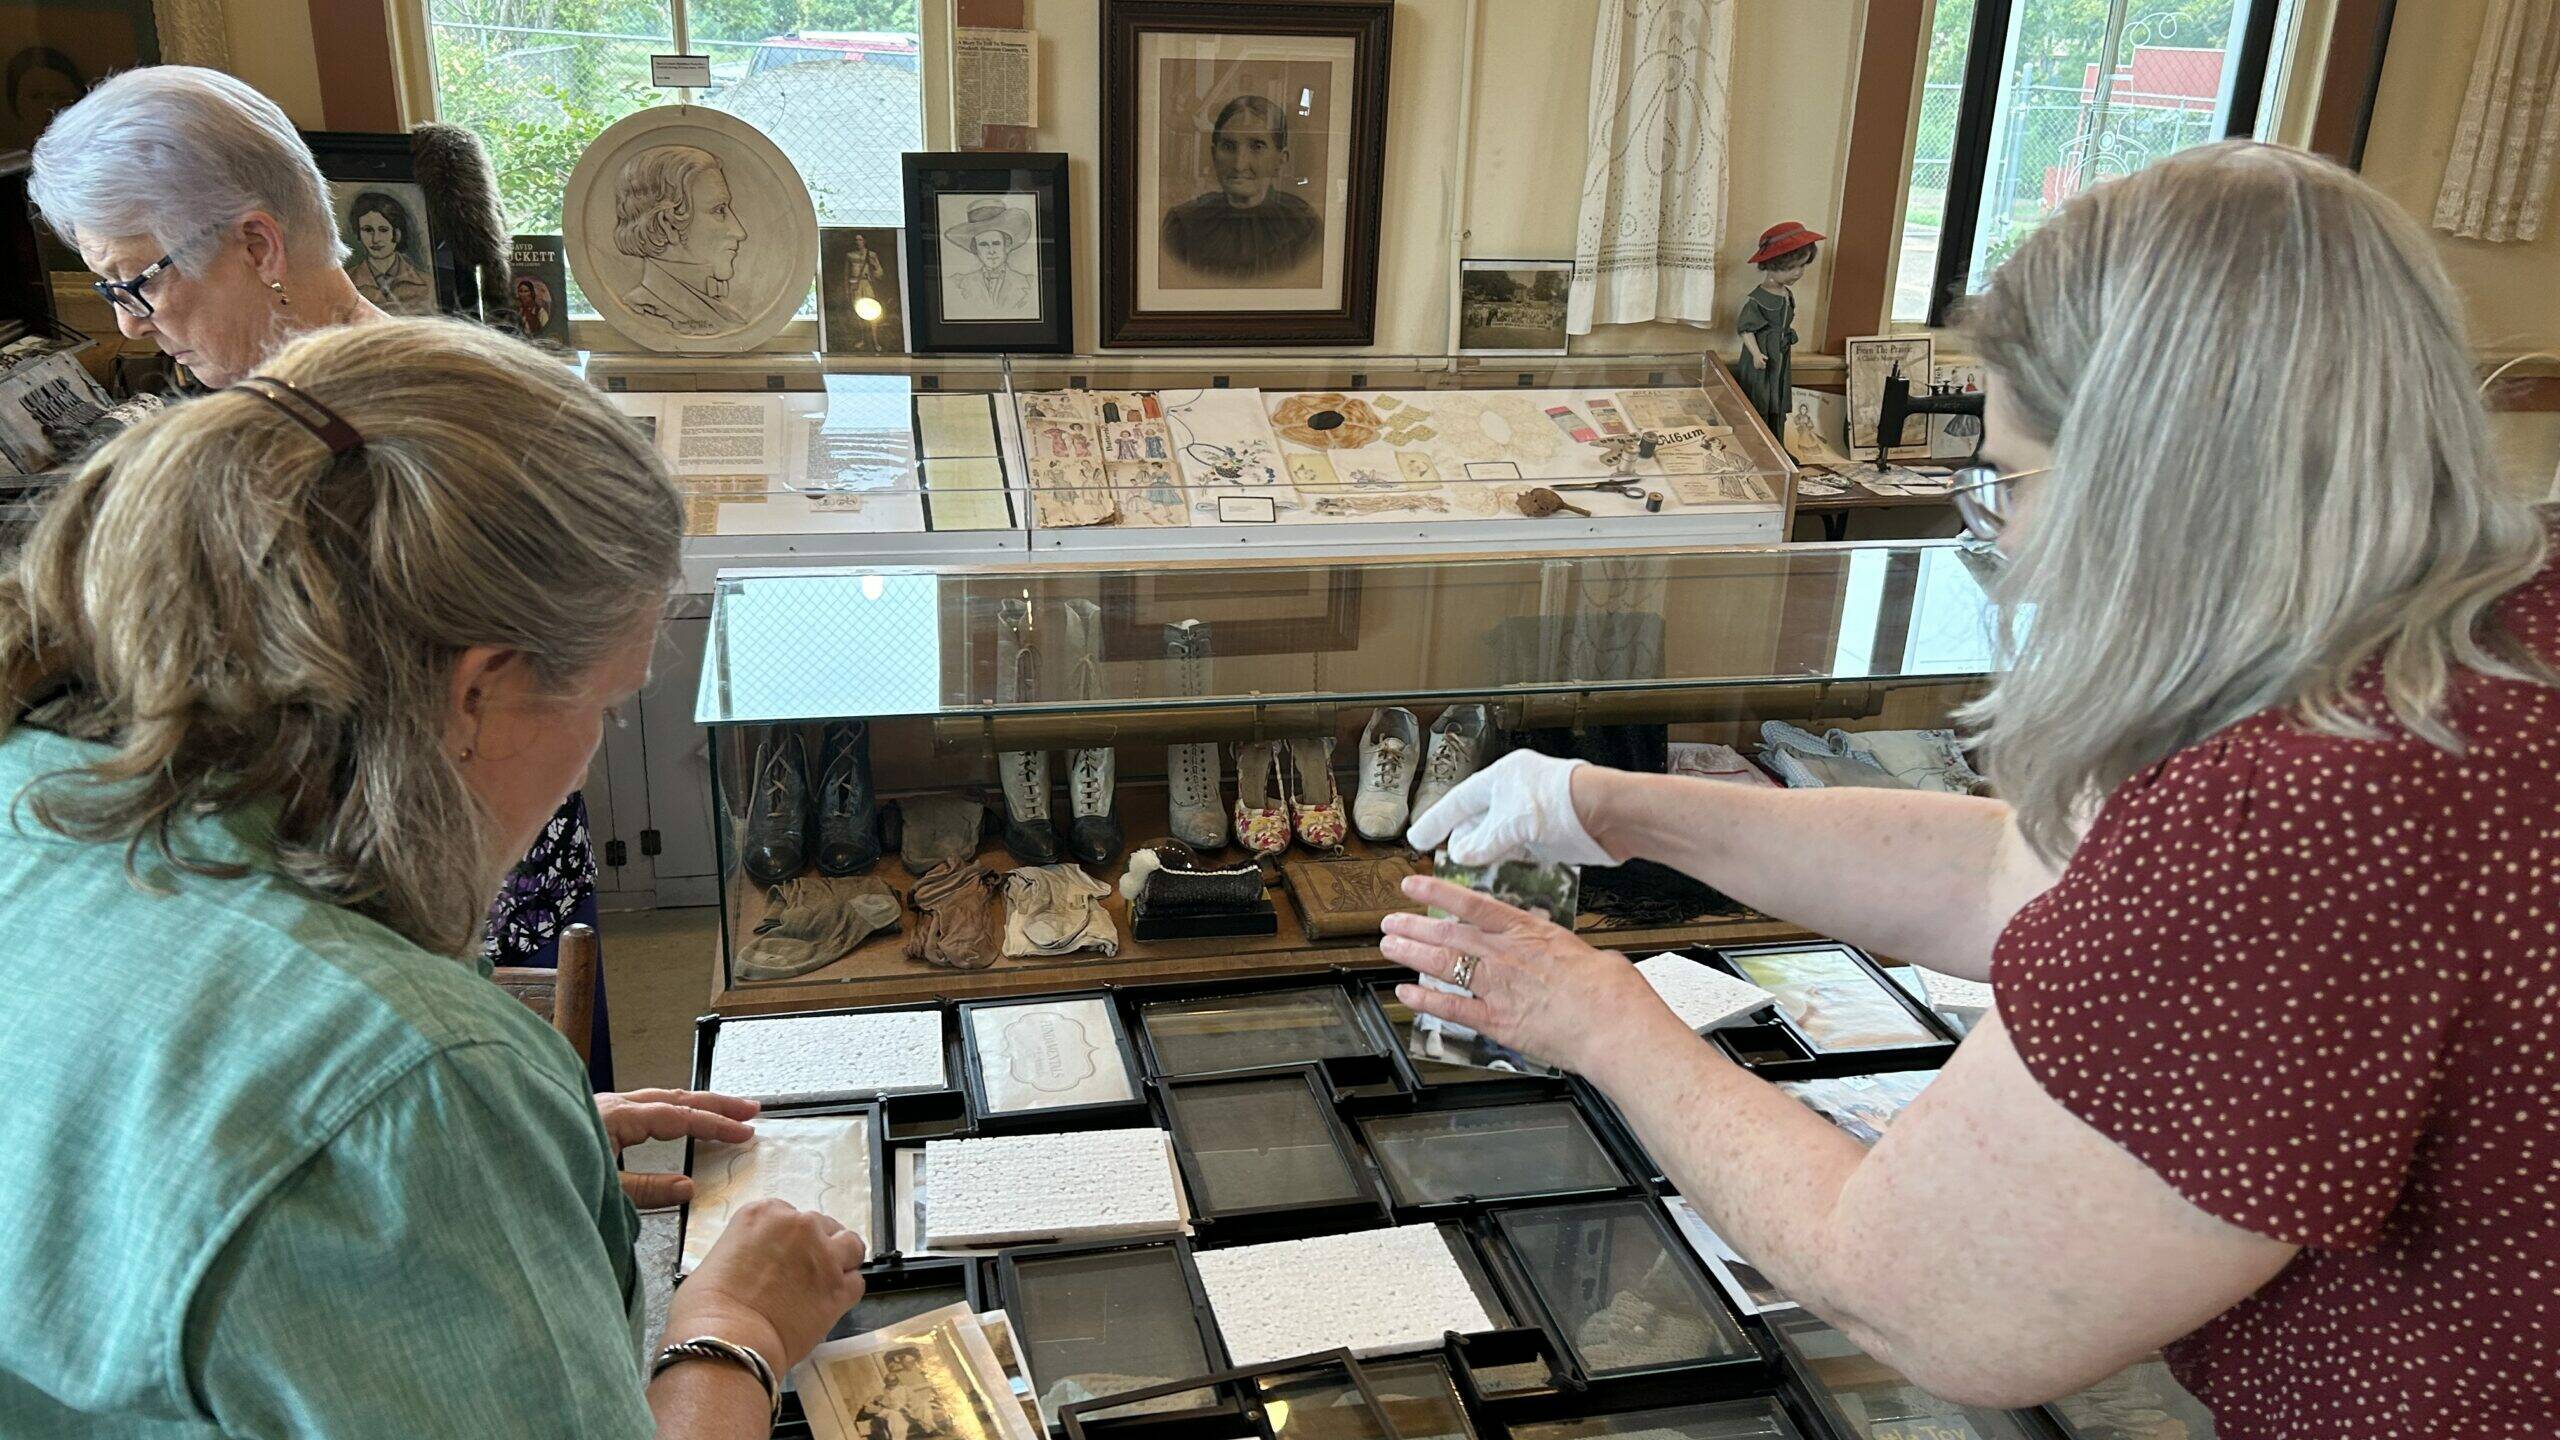 Perky Beisel (left) goes through items in the museum to decide what to digitize and preserve